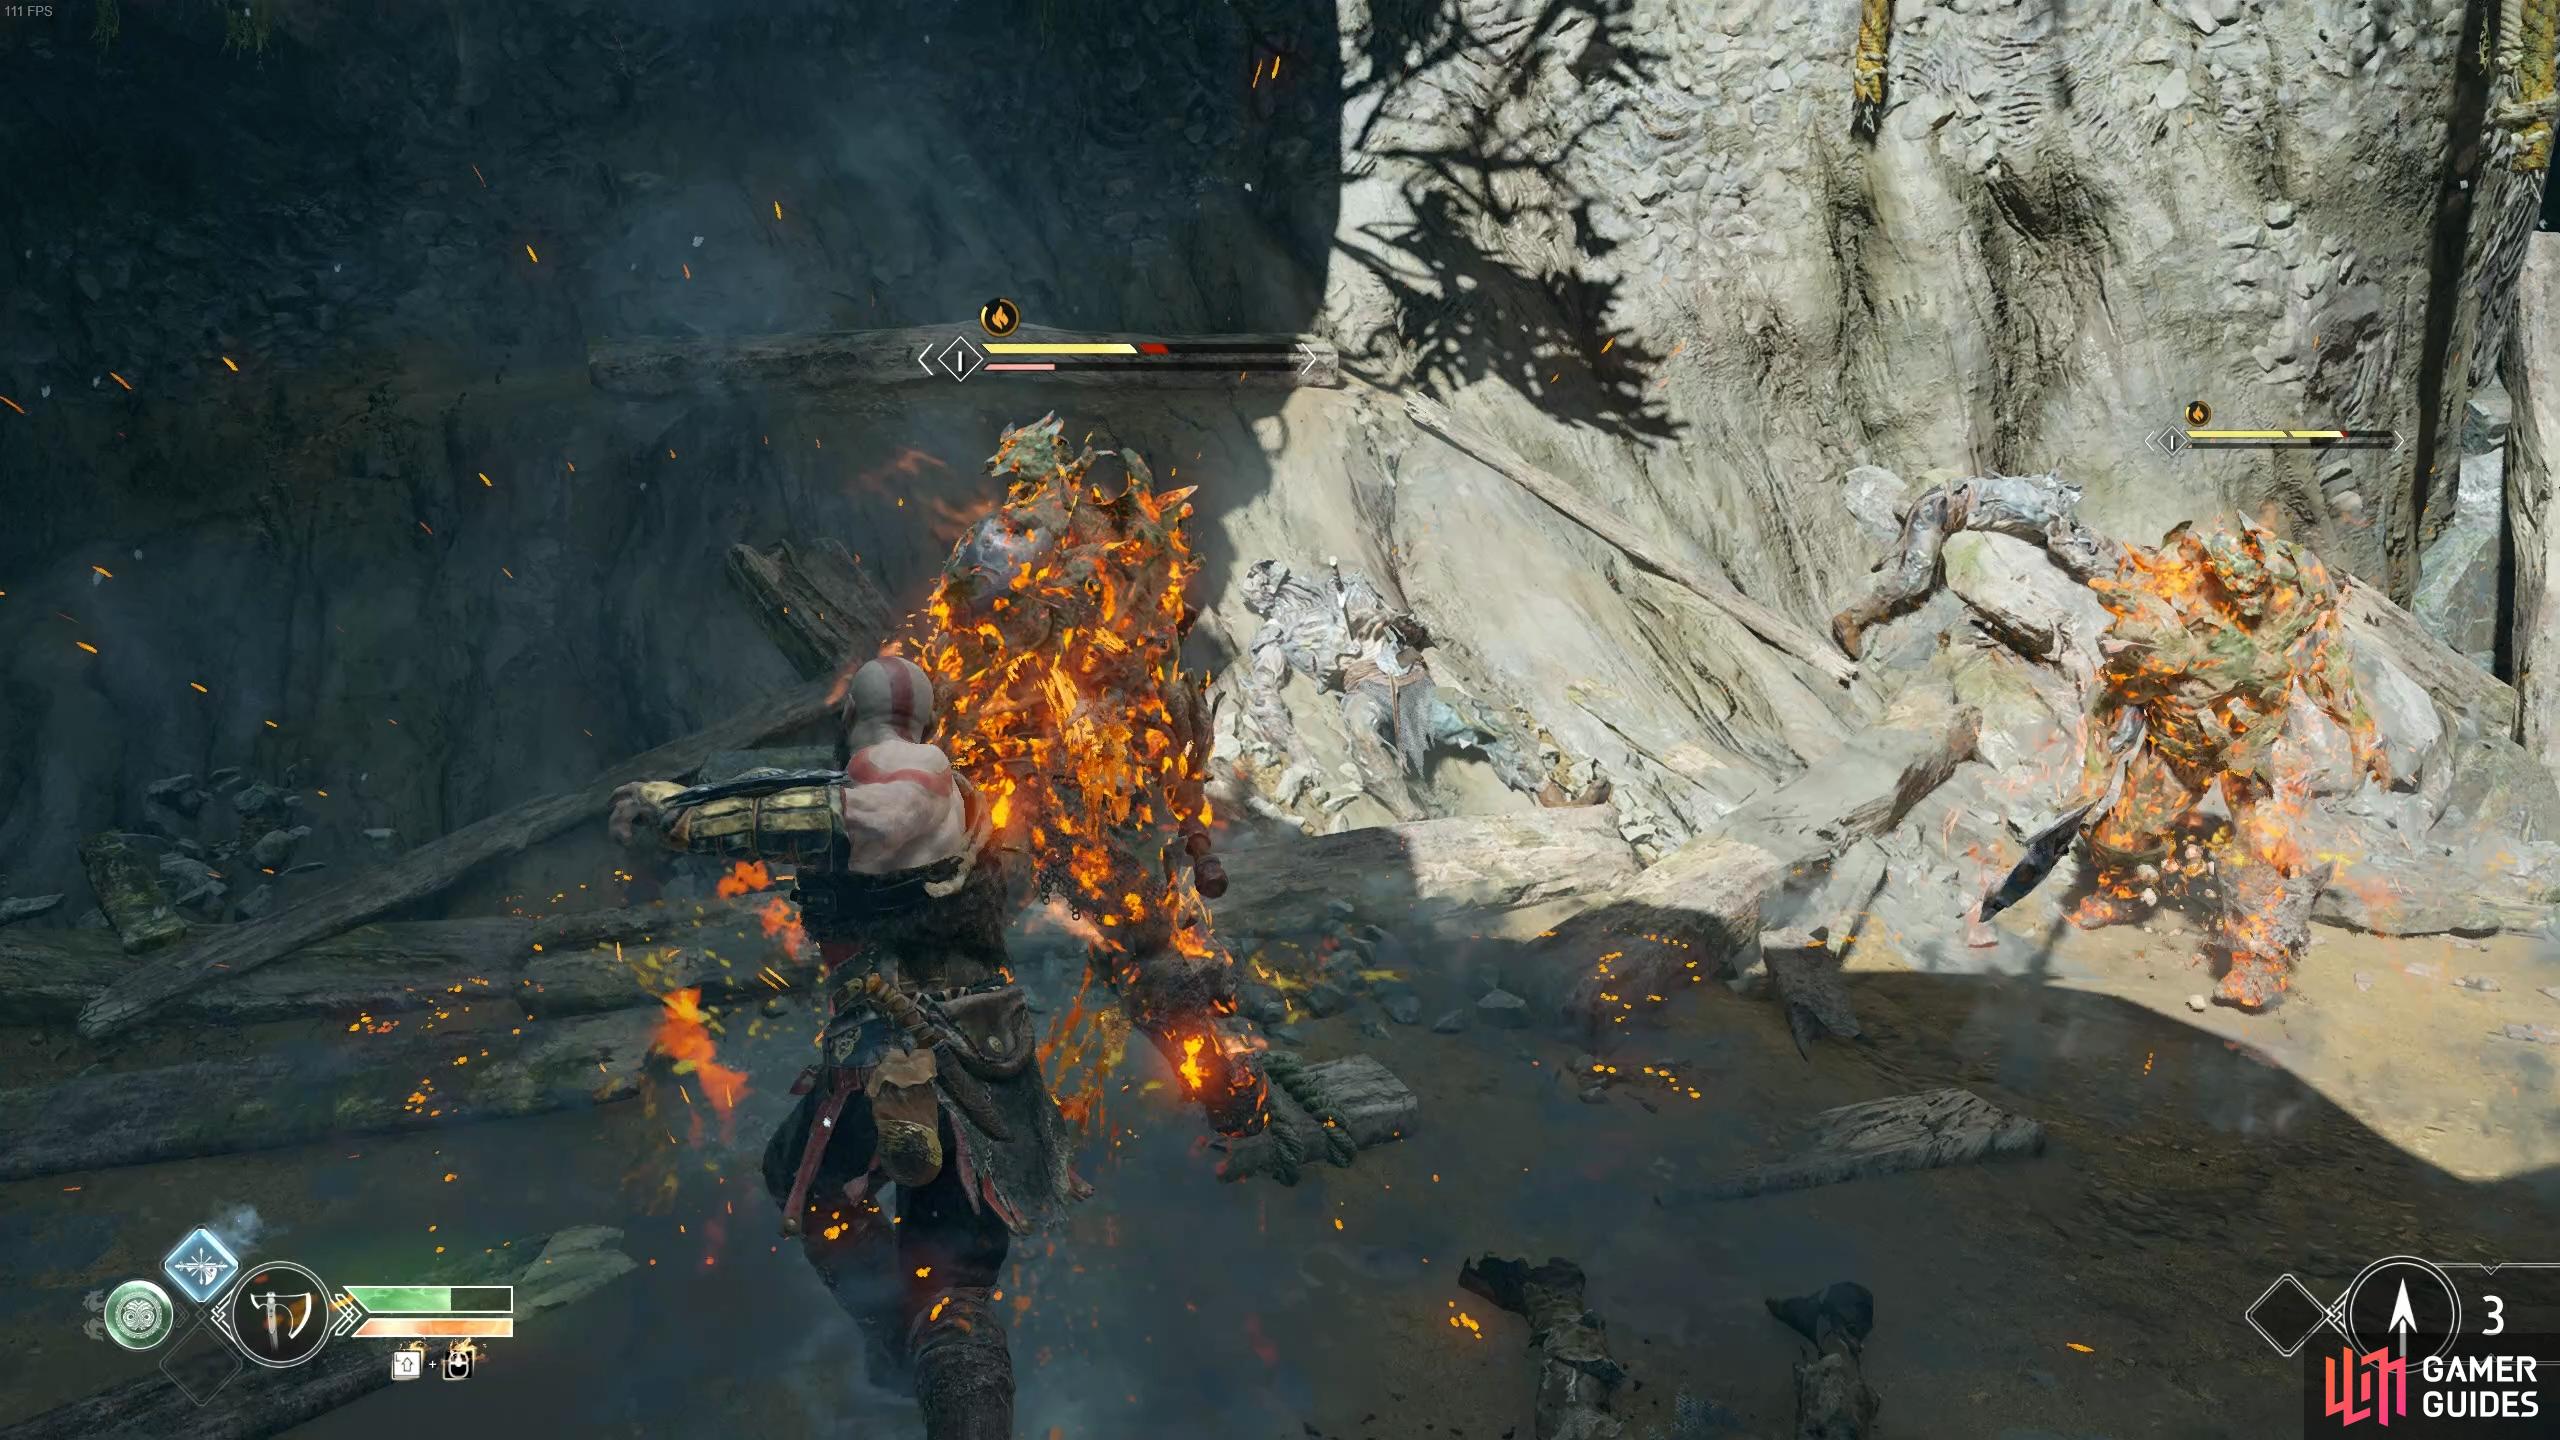 If you stun attack a projectile Draugr near the tough ones, it will set them on fire, causing damage over time.